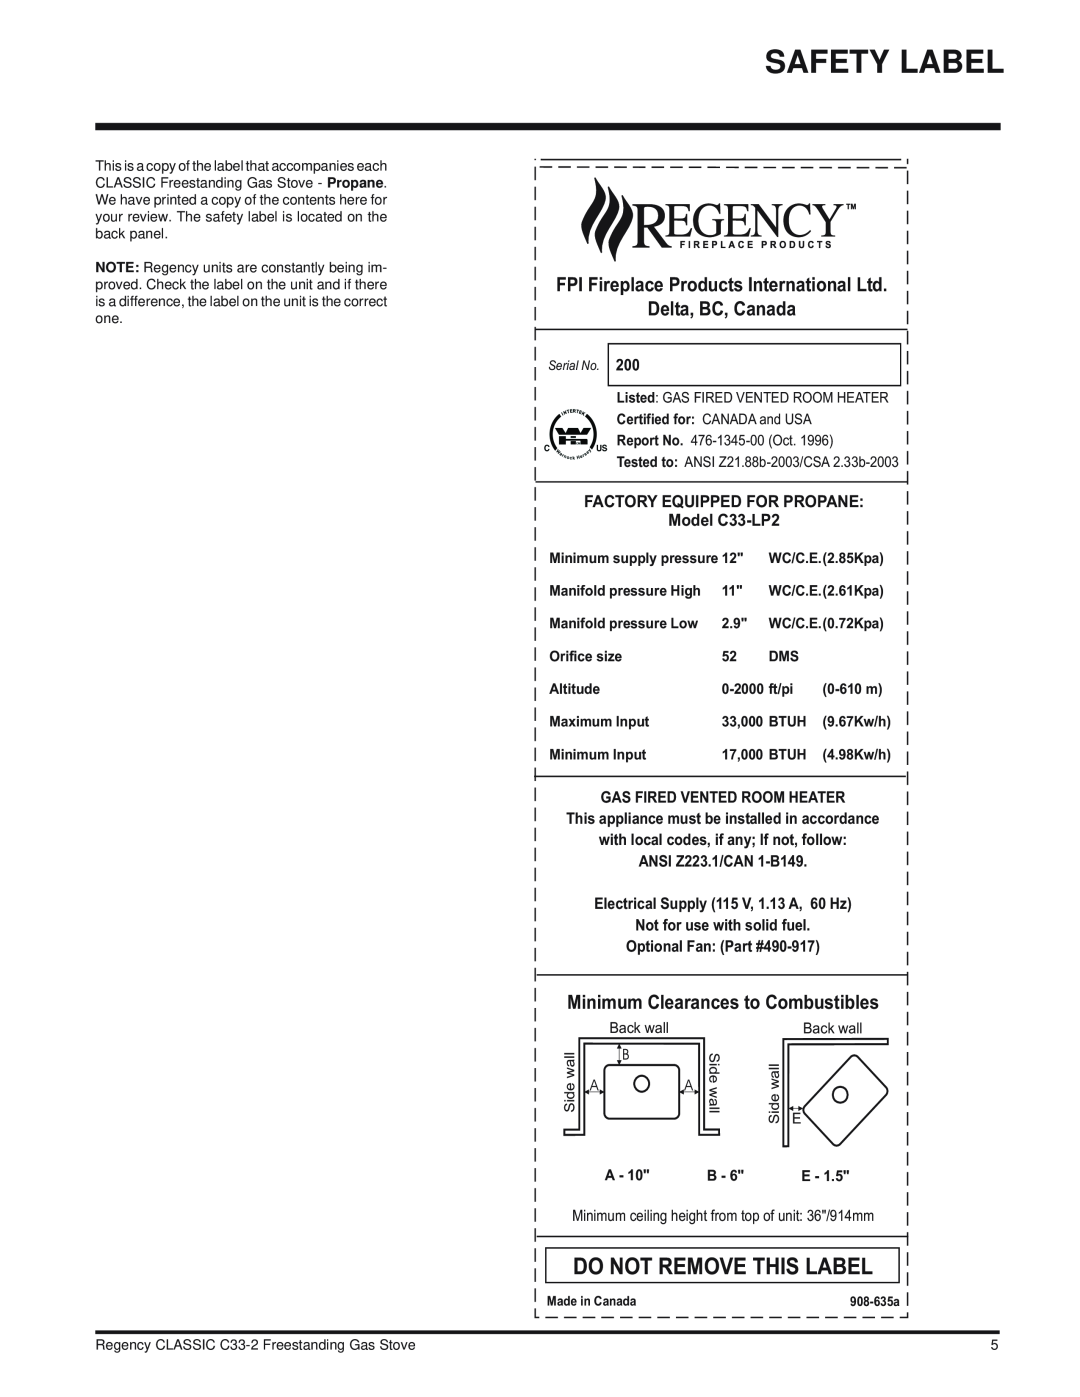 Regency C33-NG2 Do Not Remove This Label, Delta, BC, Canada, Minimum Clearances to Combustibles, ANSI Z223.1/CAN 1-B149 